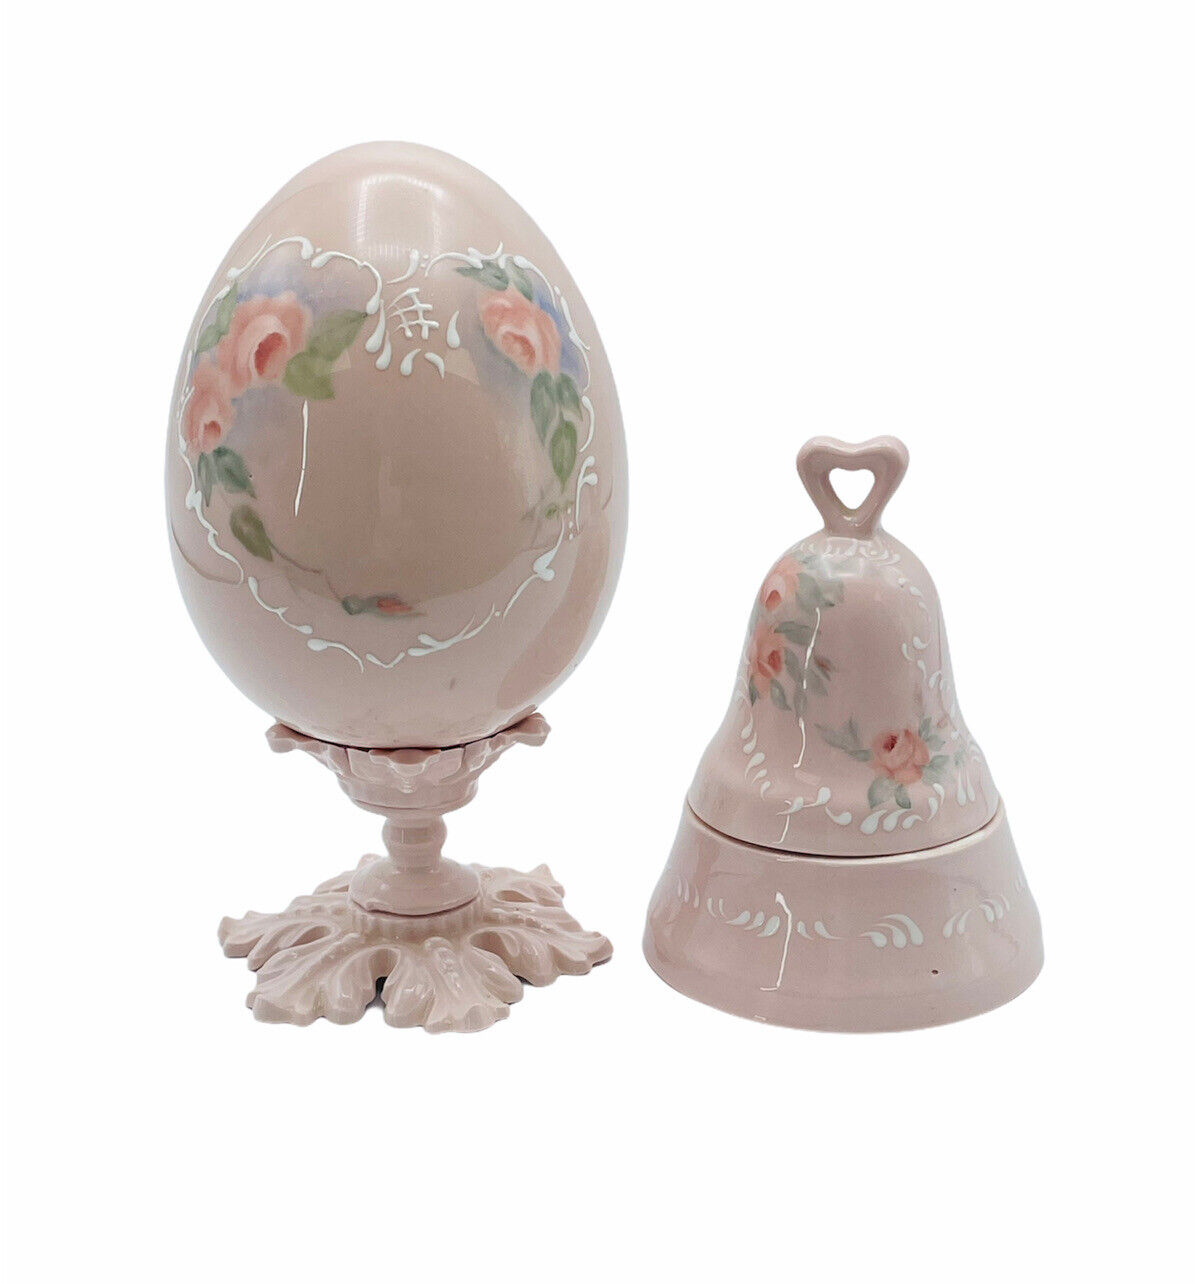 Lot 2 Bell-shaped Trinket Box & Egg on Stand Pink China Handpainted Roses Hearts